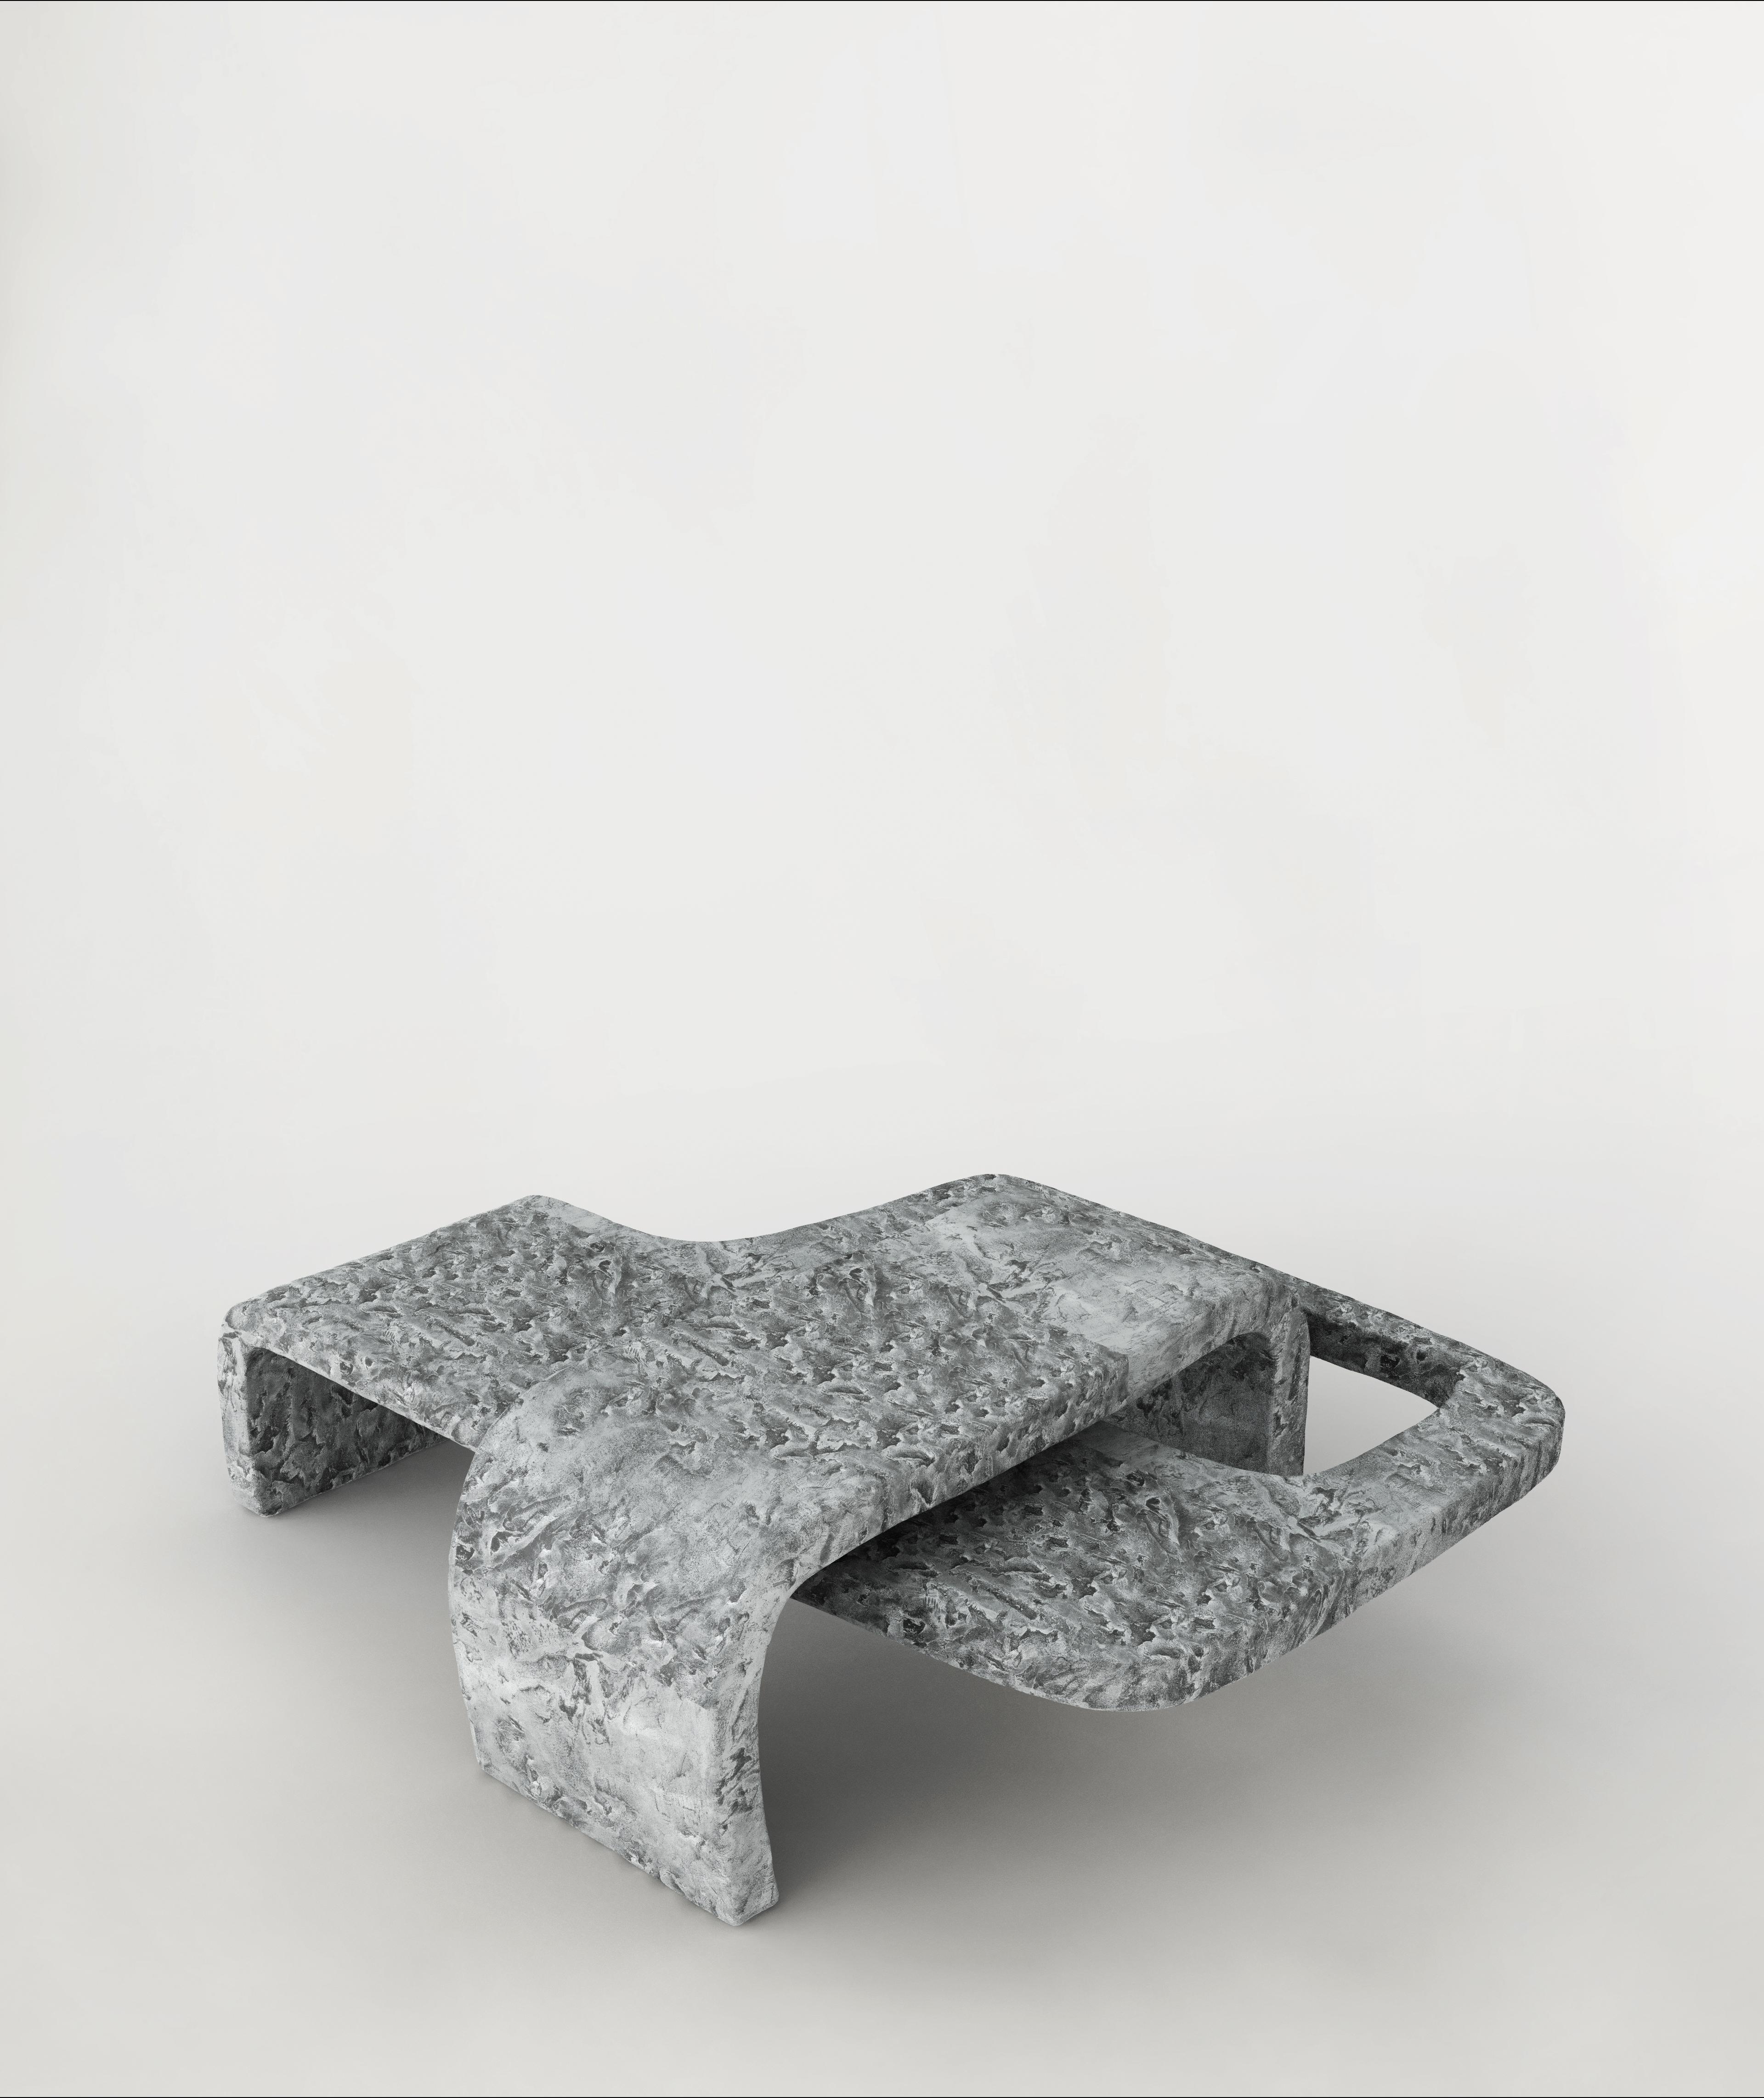 Vertigo N01 low table by Edizione Limitata.
Limited edition. Signed and numbered.
Designers: Simone Fanciullacci
Dimensions: H 29 × W 72 × L 92 cm
Materials: Aluminium

Edizione Limitata, that is to say “Limited Edition”, is a brand promoting